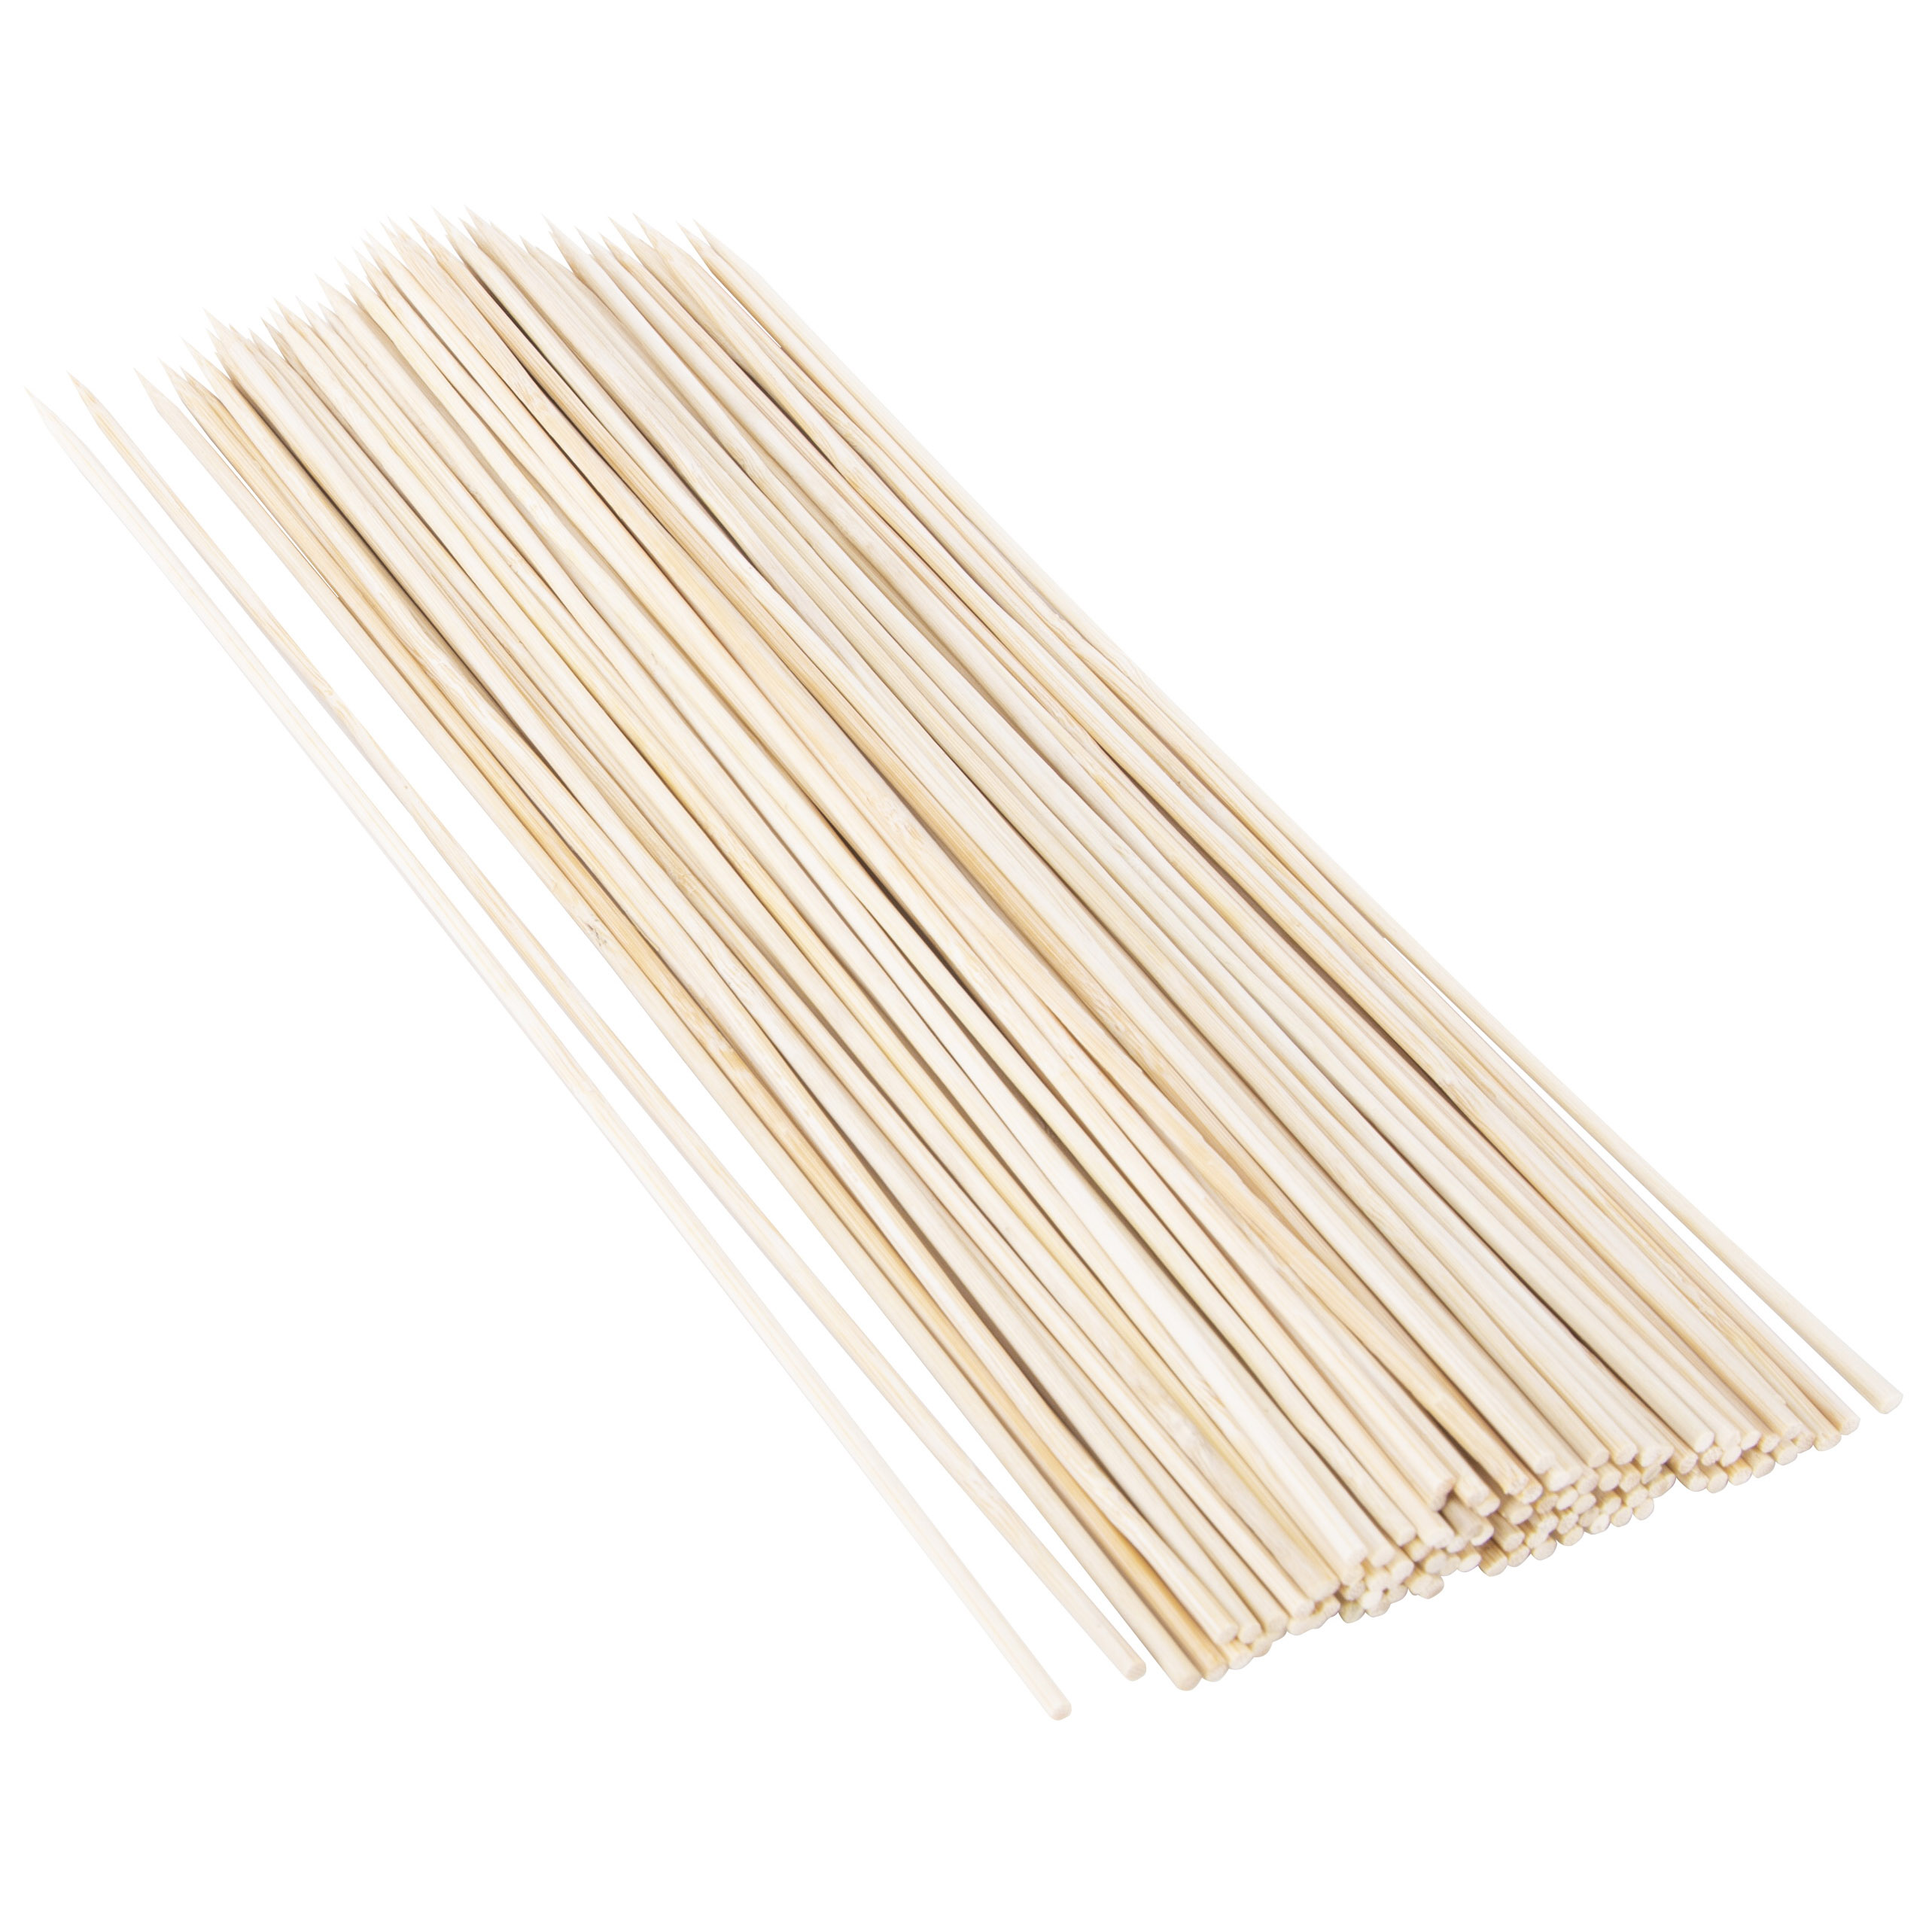 100 Pc Bamboo Skewers, 12 in L, Bamboo